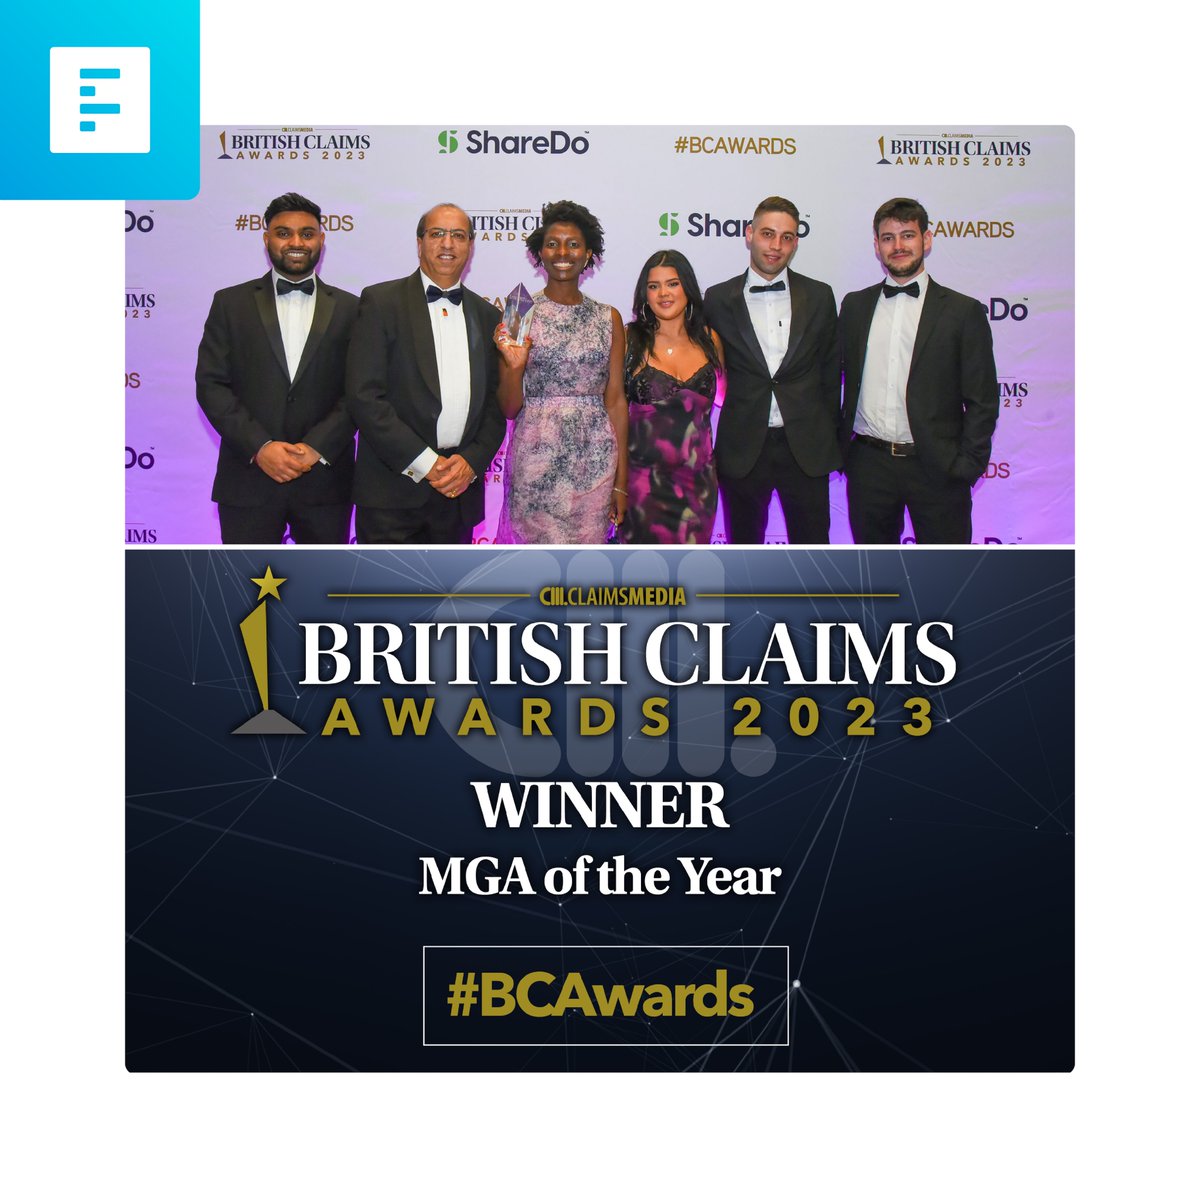 Last week, we picked up 'MGA of the Year' at the British Claims Awards 🎉 

Brokers are crucial to what we do. Nyasha, Joe, and Justine were there to celebrate with members of the broker family @ForumInsurance.

Thank you to all of our brokers who continue to believe in us!